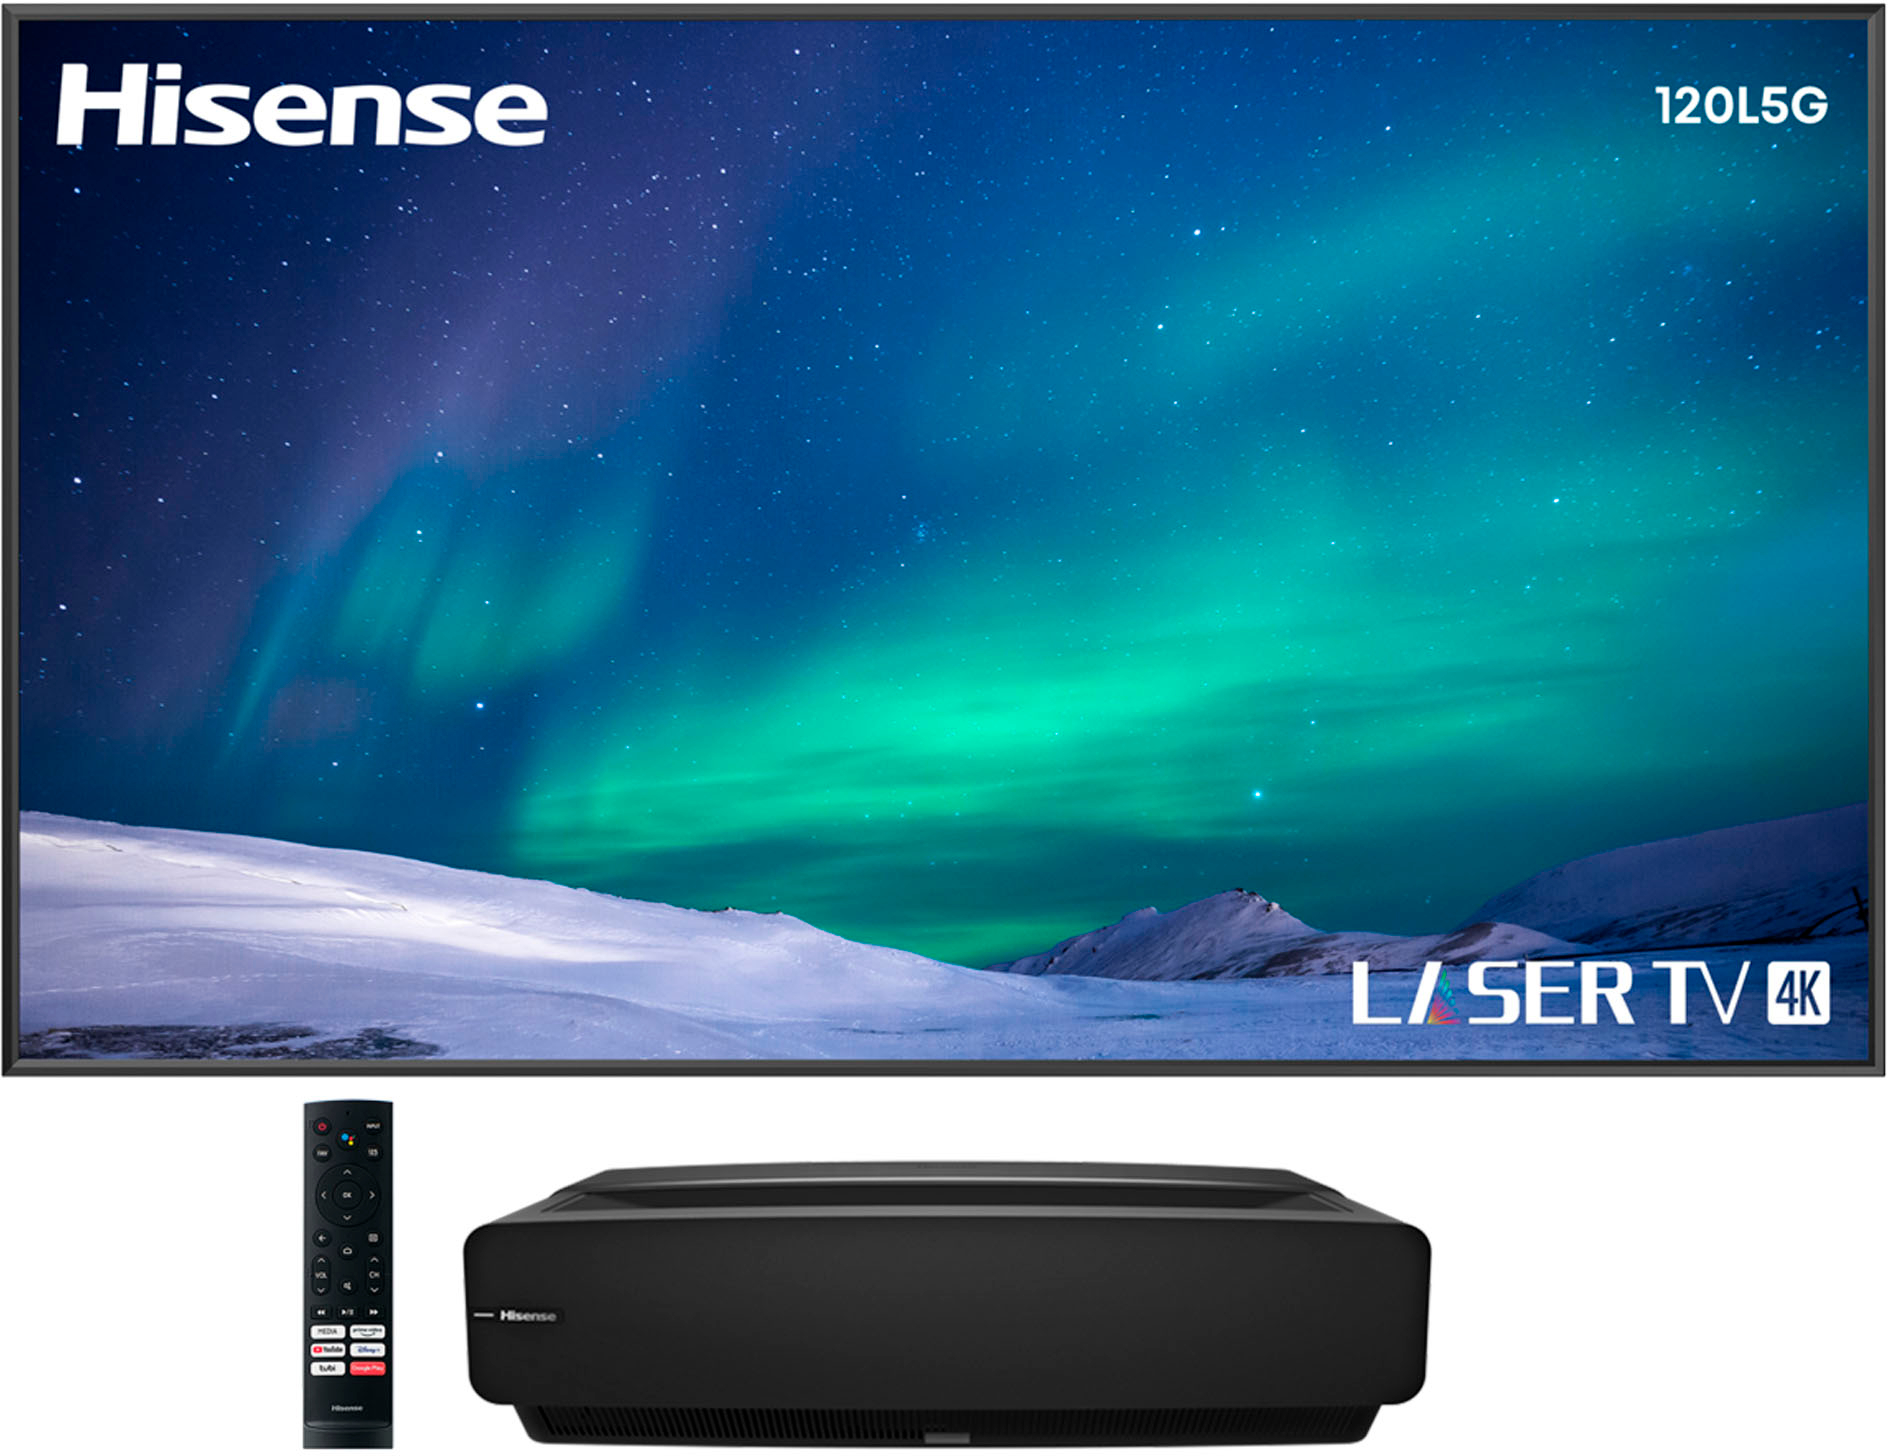 Hisense Laser TV Short Throw Projector with 120" ALR Screen, 4K UHD, 2700 Lumens, HDR10, Android TV Black 120L5G-CINE120A - Best Buy